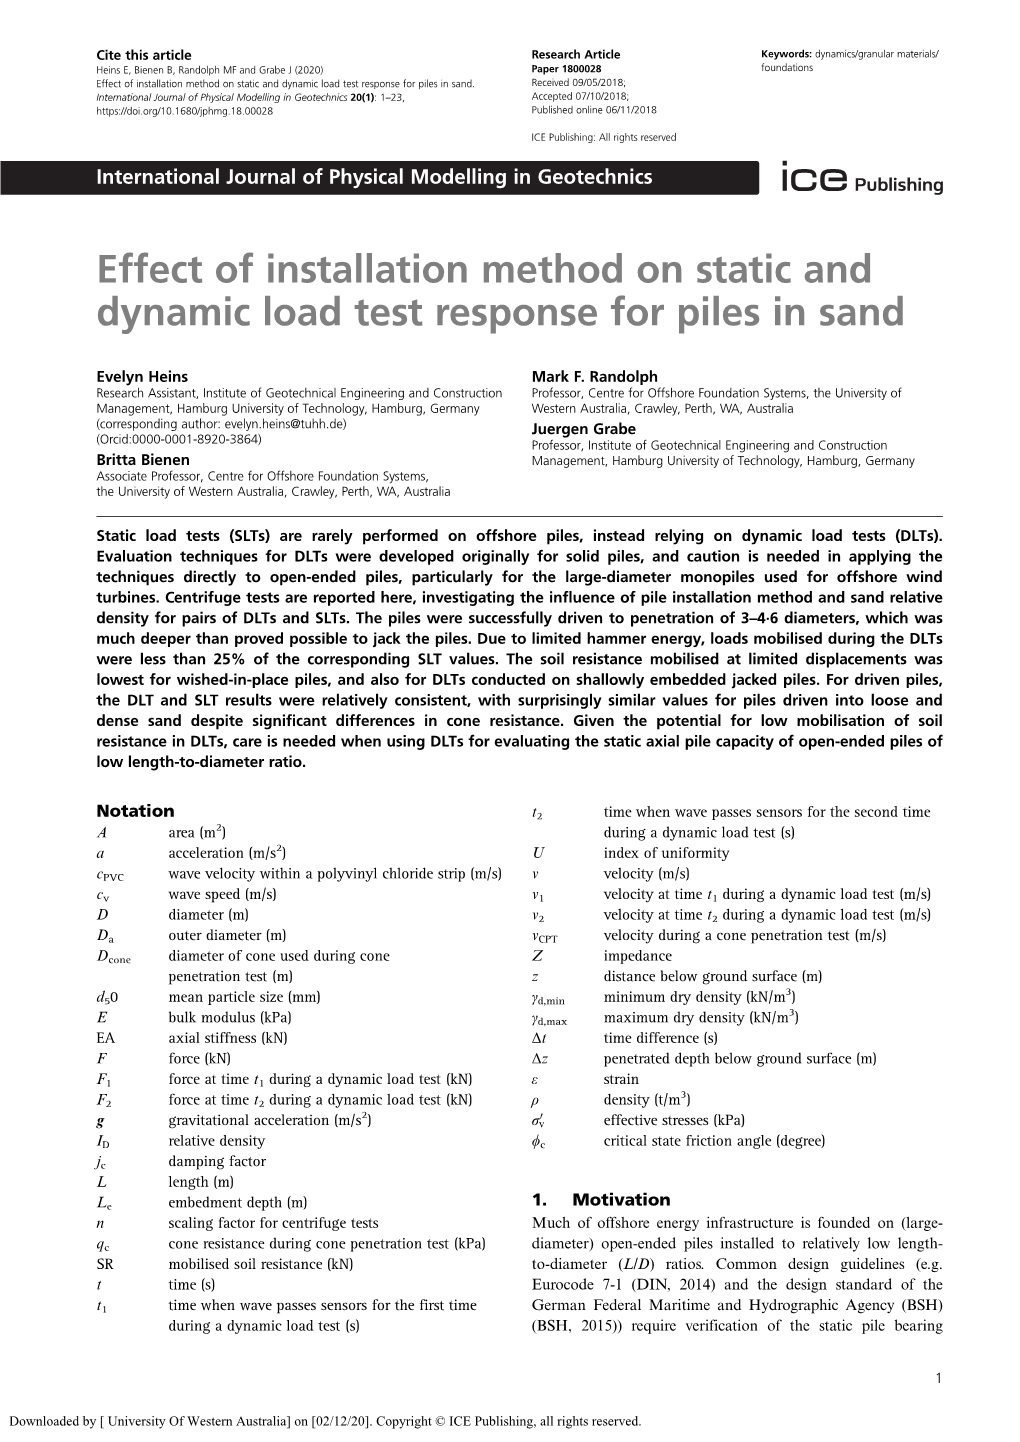 Effect of Installation Method on Static and Dynamic Load Test Response for Piles in Sand